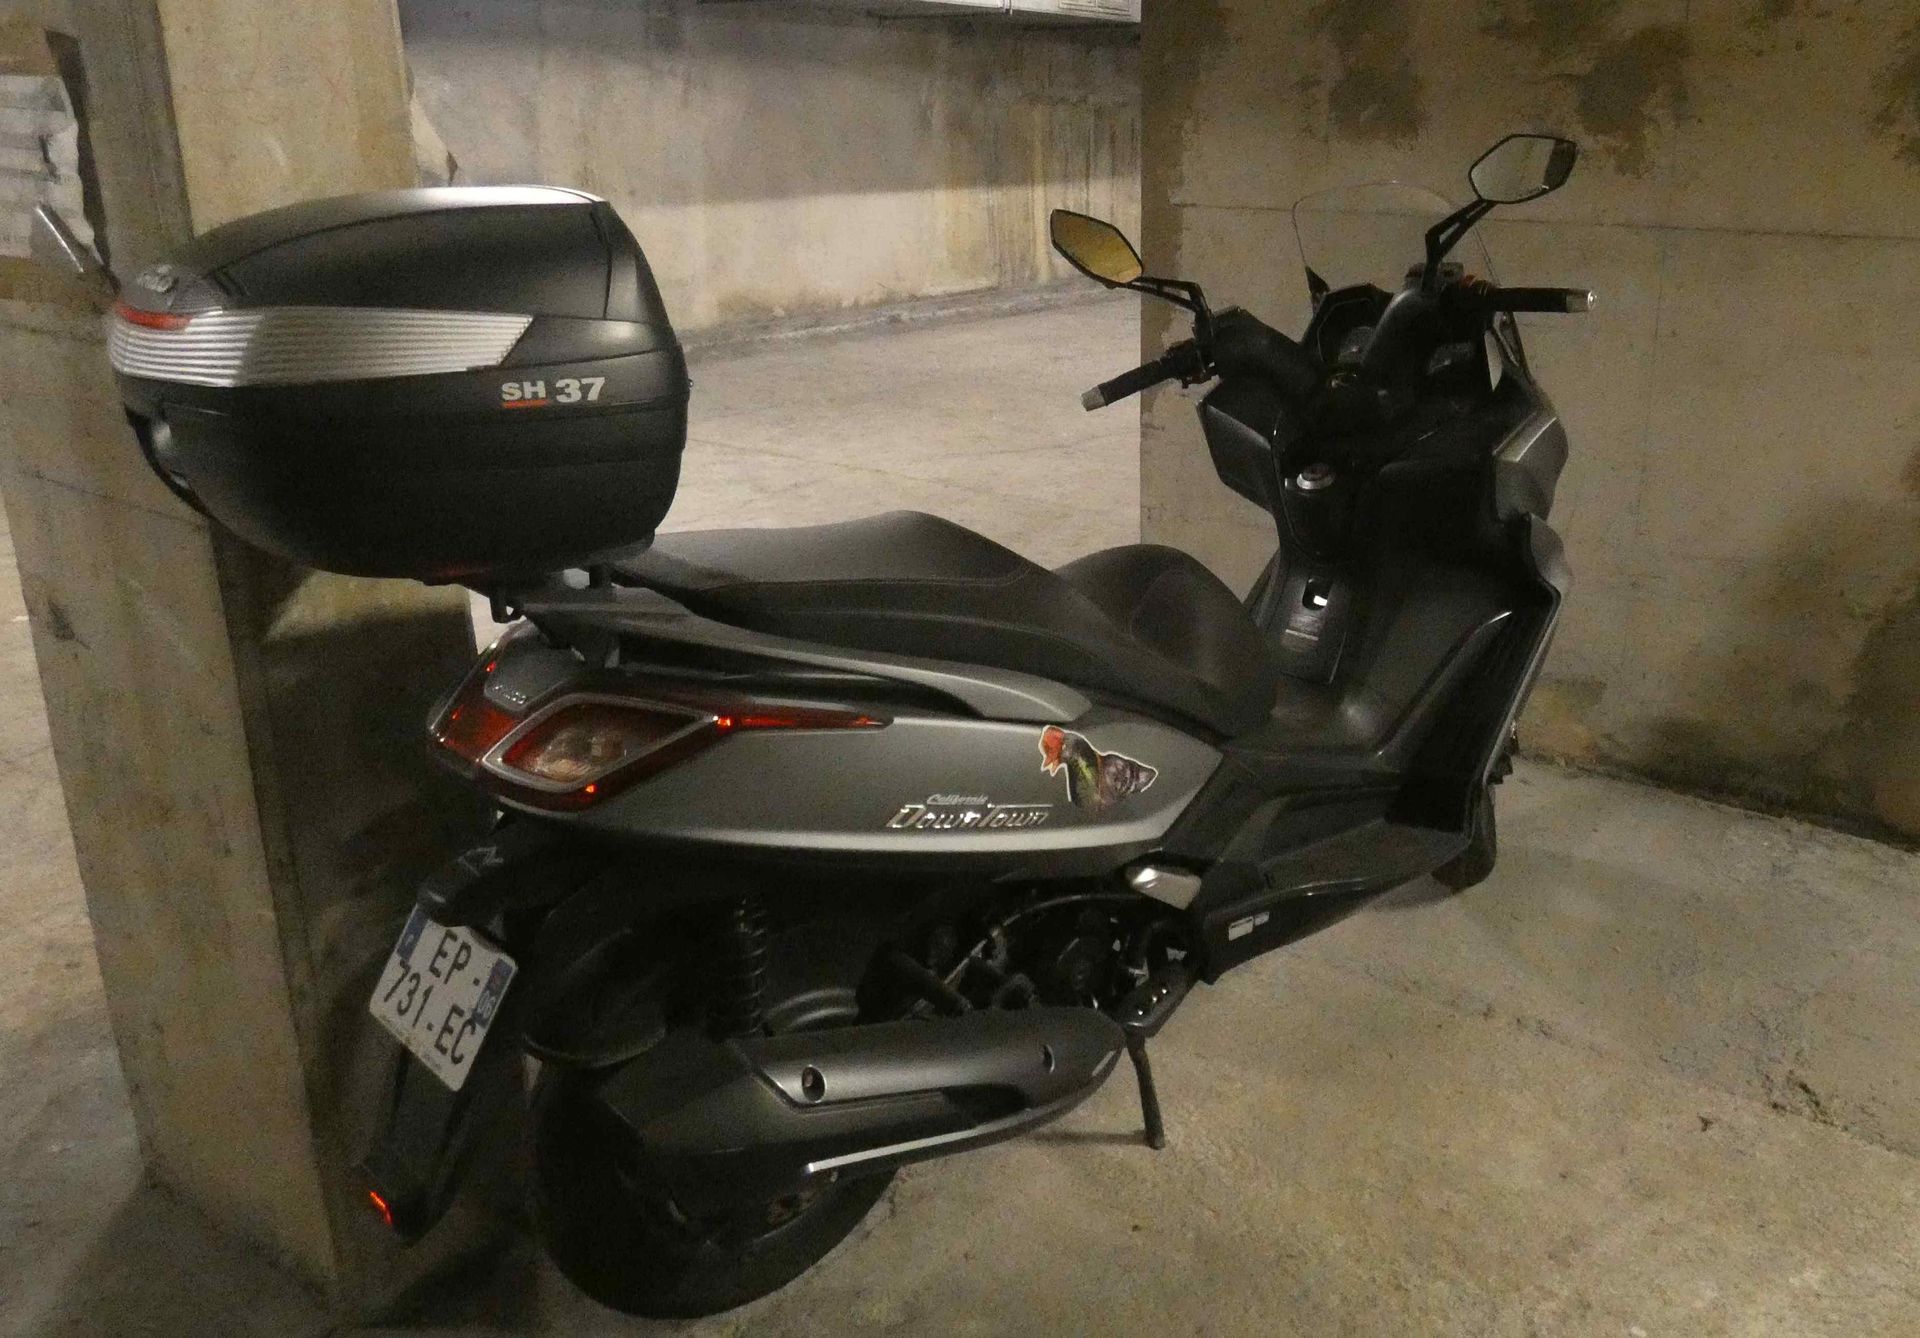 Null Scooter KYMCO DOWNTOWN I350, Petrol, imm. EP-731-EC,
Type L3EKYMM1000V535, &hellip;